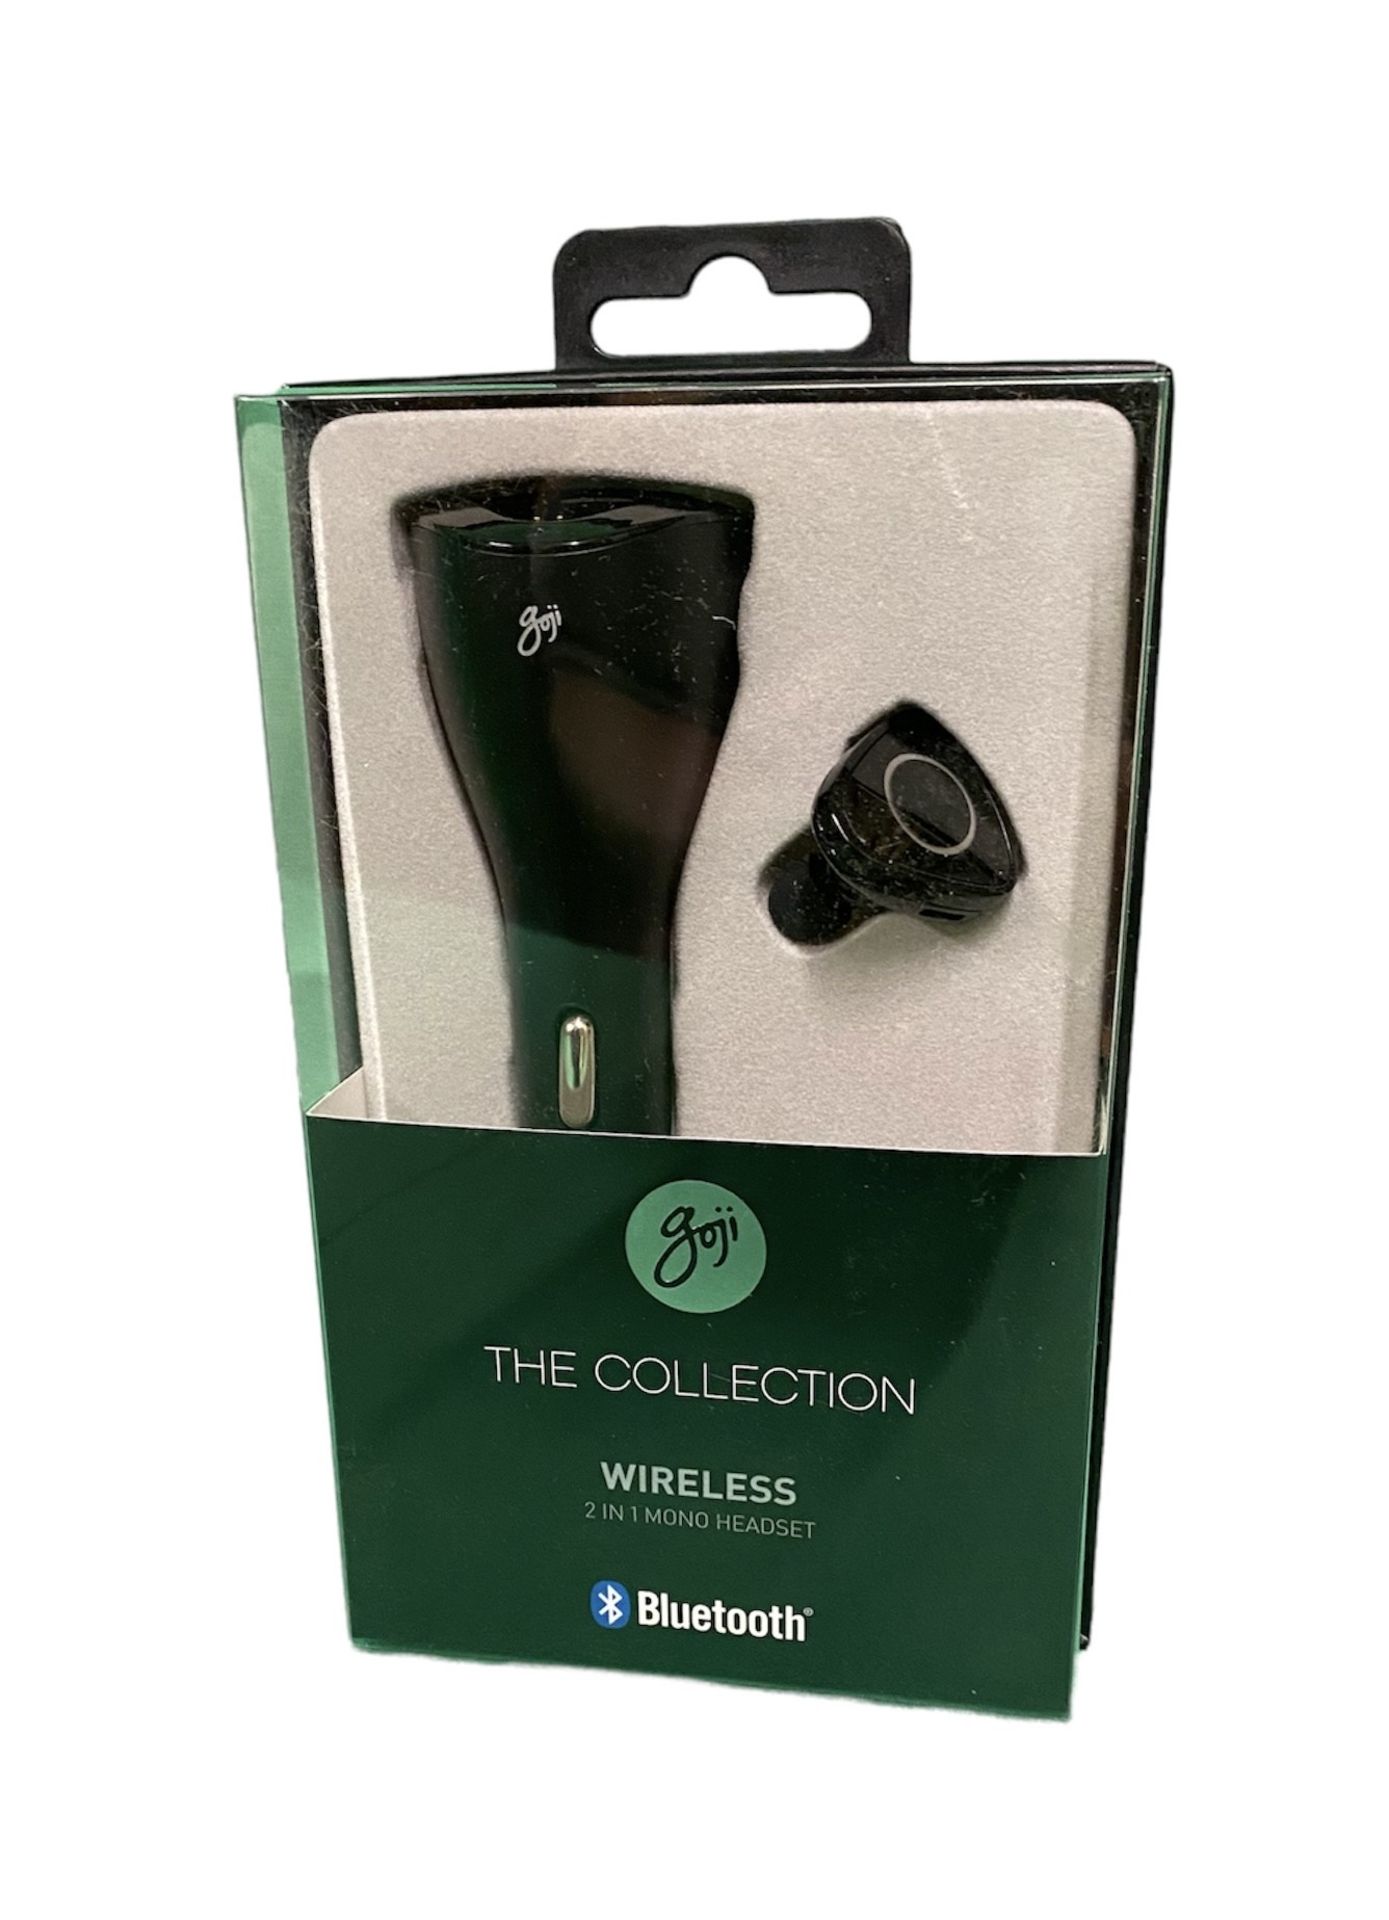 4 X Goji The Collection Bluetooth 2 In 1 Hands Free With In Car Charging Cradle Rrp 17.49 Ea